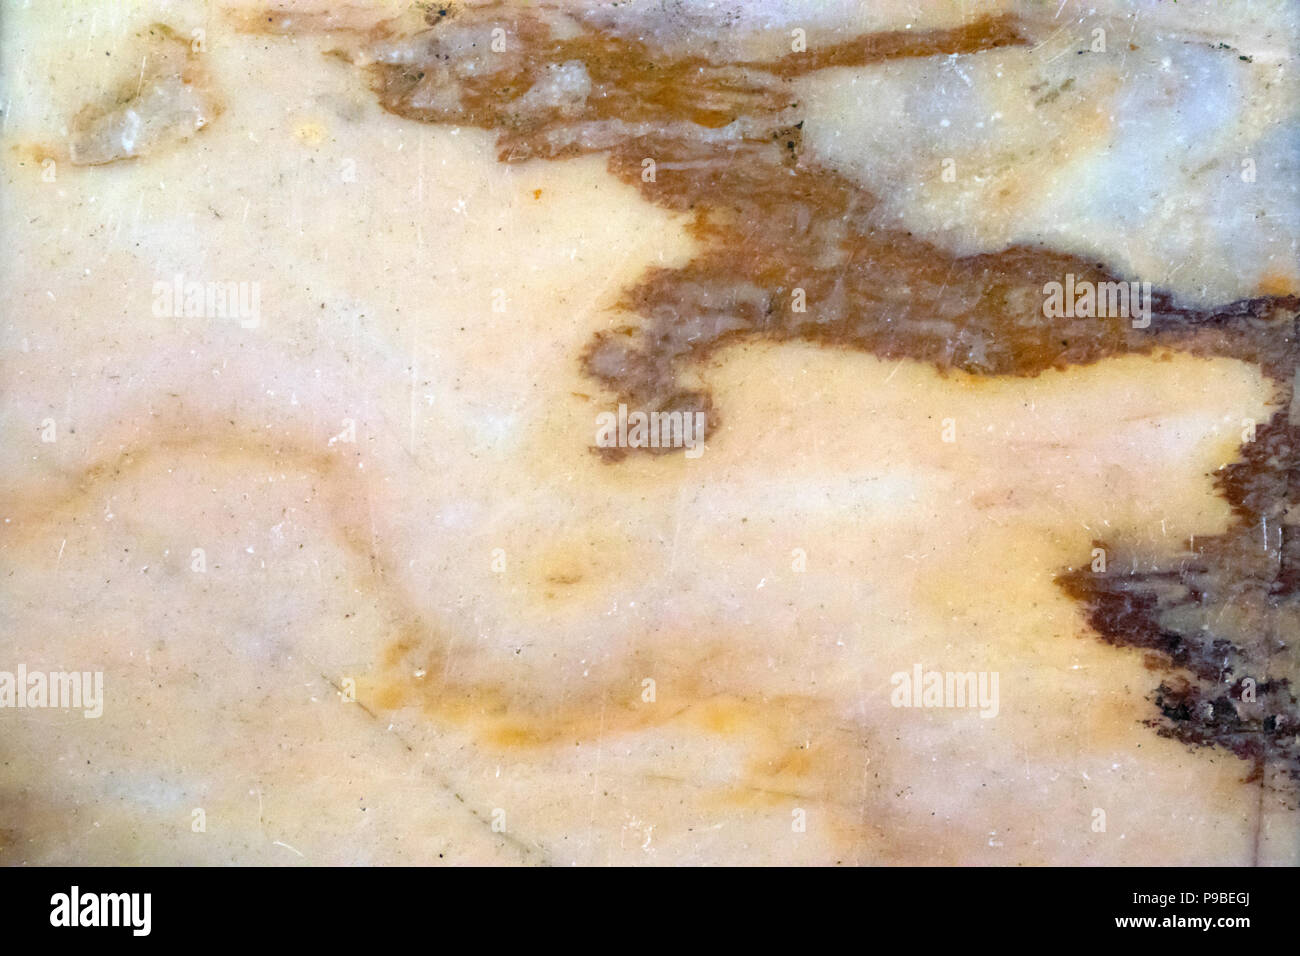 Multicolored layered marble texture with different veins, may be used as background Stock Photo